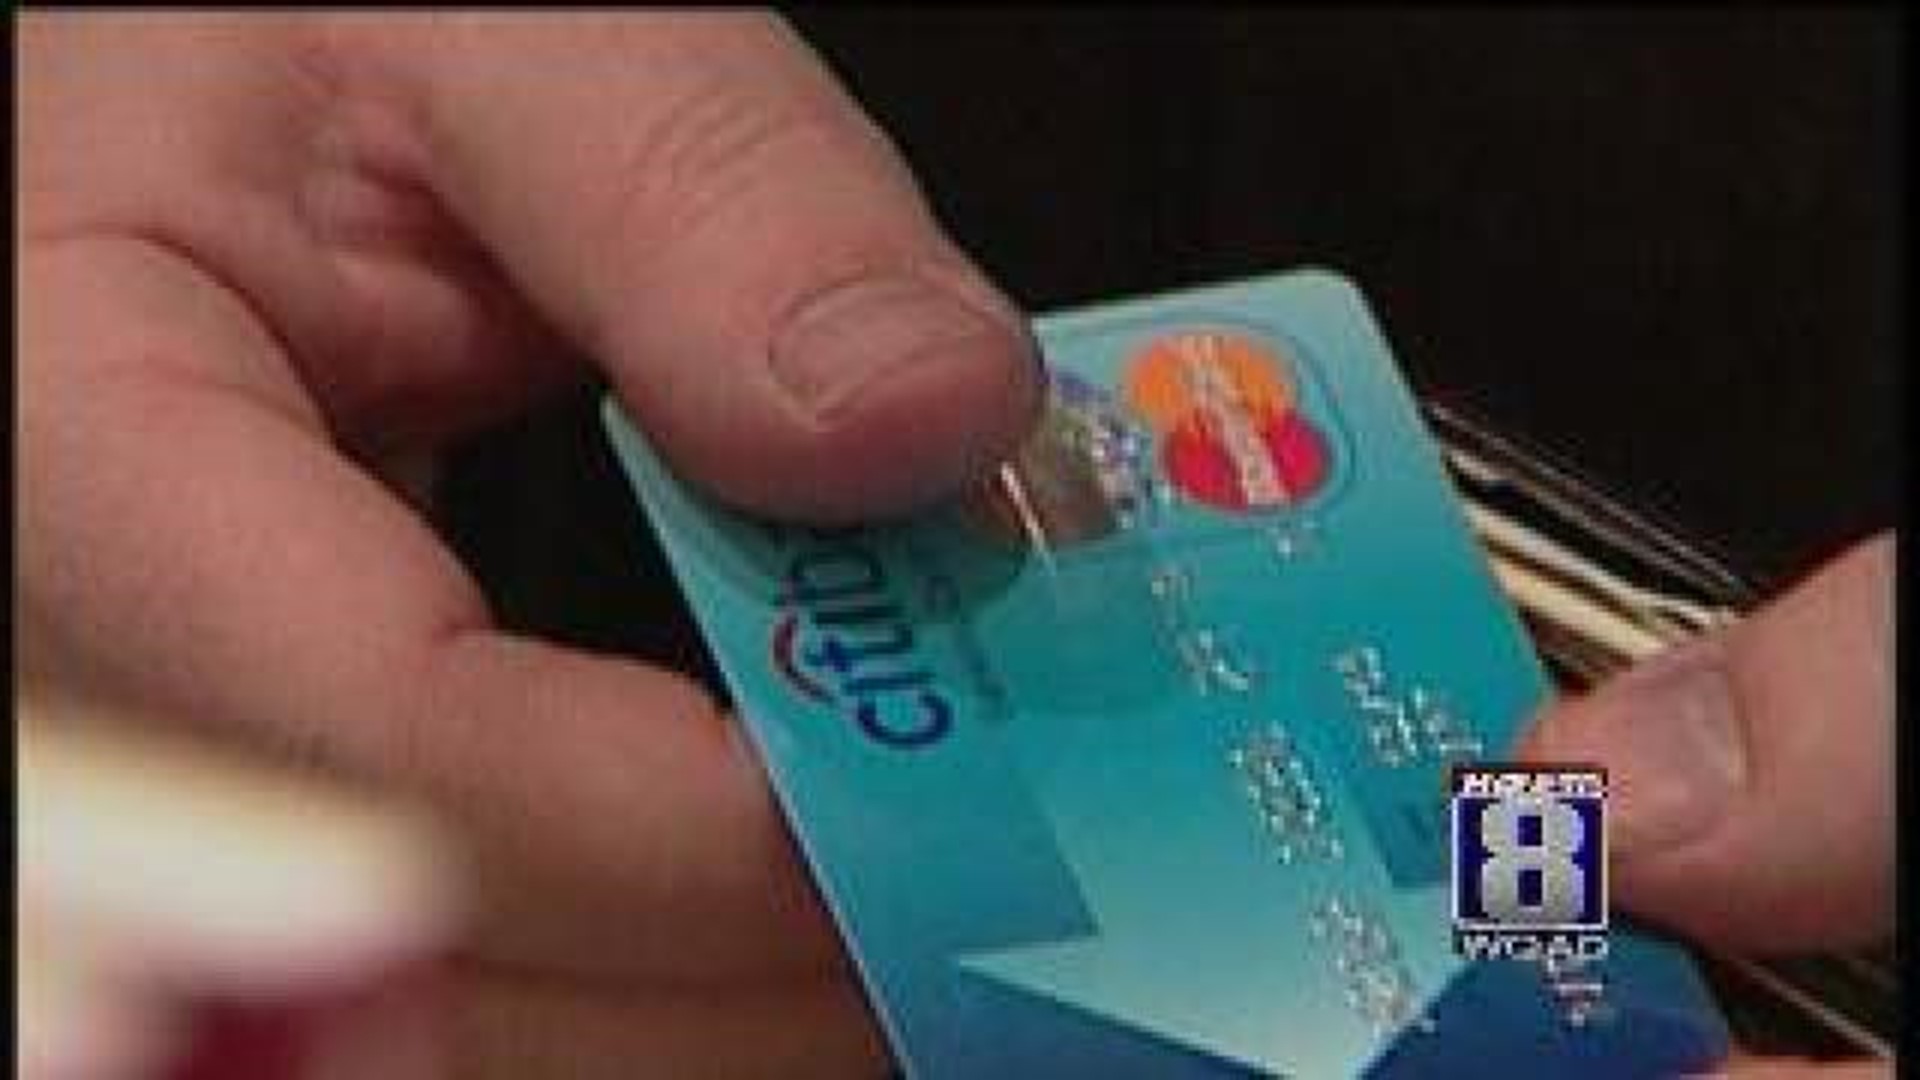 Hackers steal 1.5 million credit card numbers